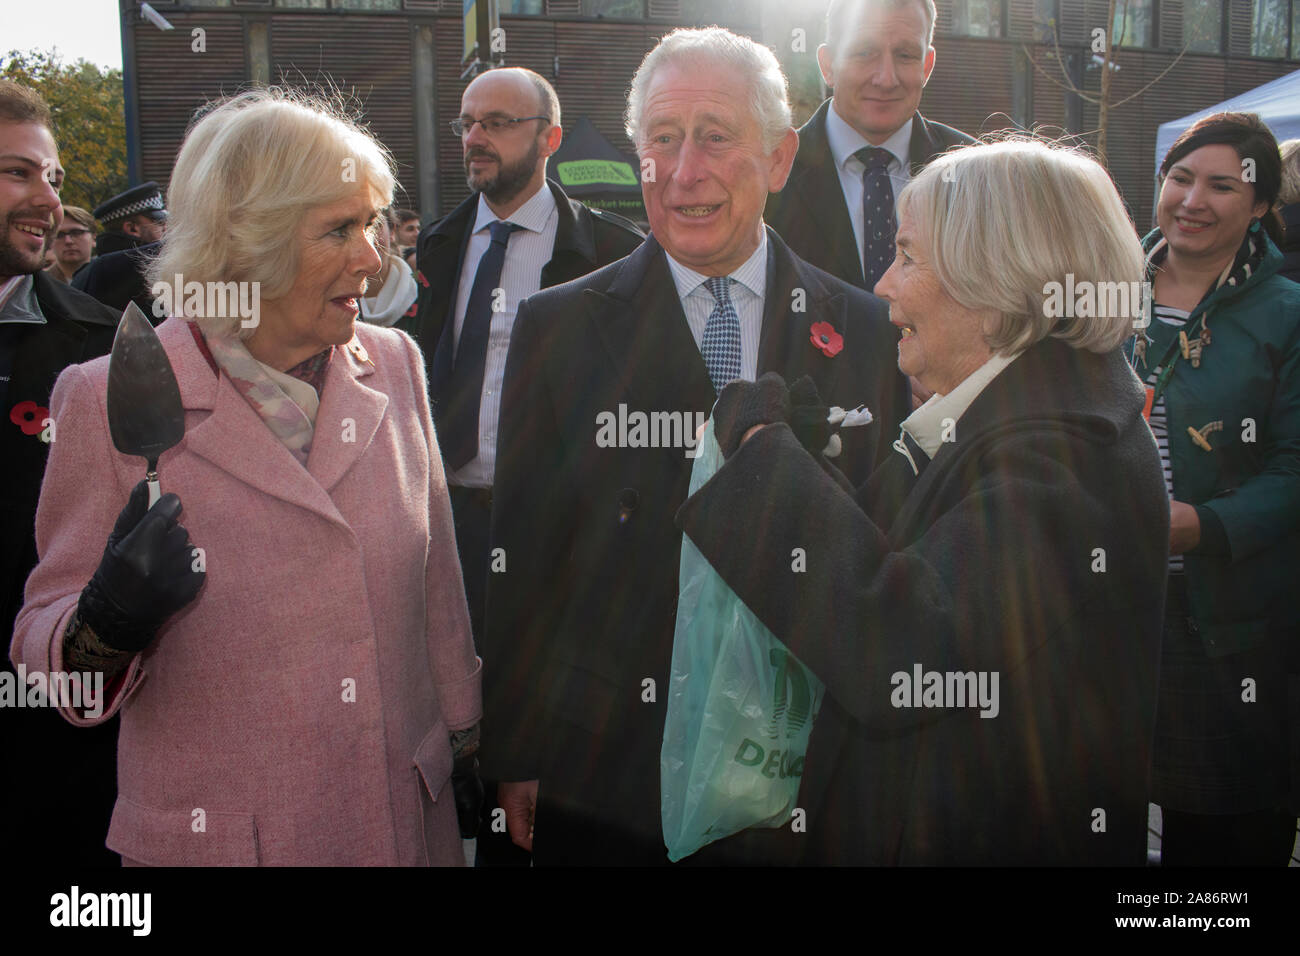 Prince Charles and Camilla the Duchess of Cornwall at the Swiss Cottage farmers market, meeting stall holders. Charles relaxed and laughing, Camilla with a cake cutter. Body guards are standing behind them. Its is the 20th anniversary of London Farmers Market. UK 2019. 2010s HOMER SYKES Stock Photo